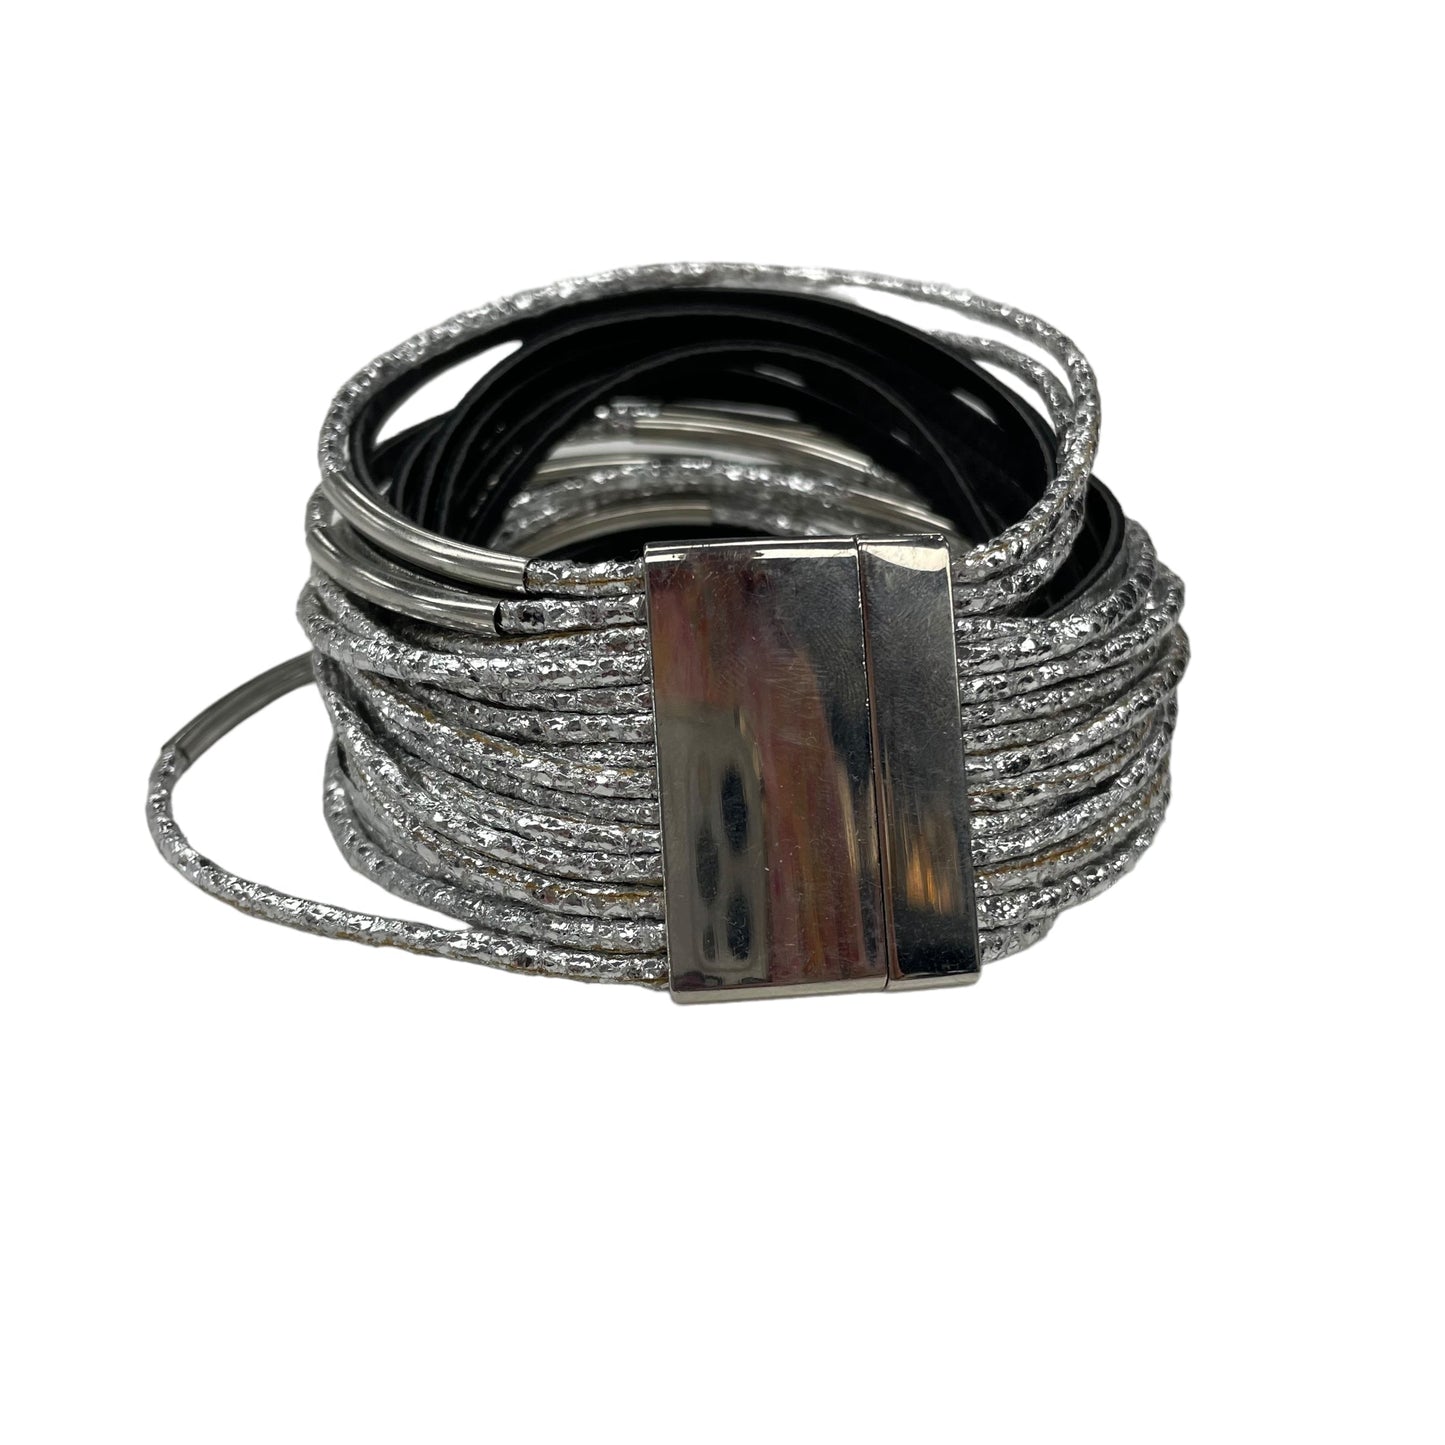 SILVER BRACELET CUFF by CLOTHES MENTOR